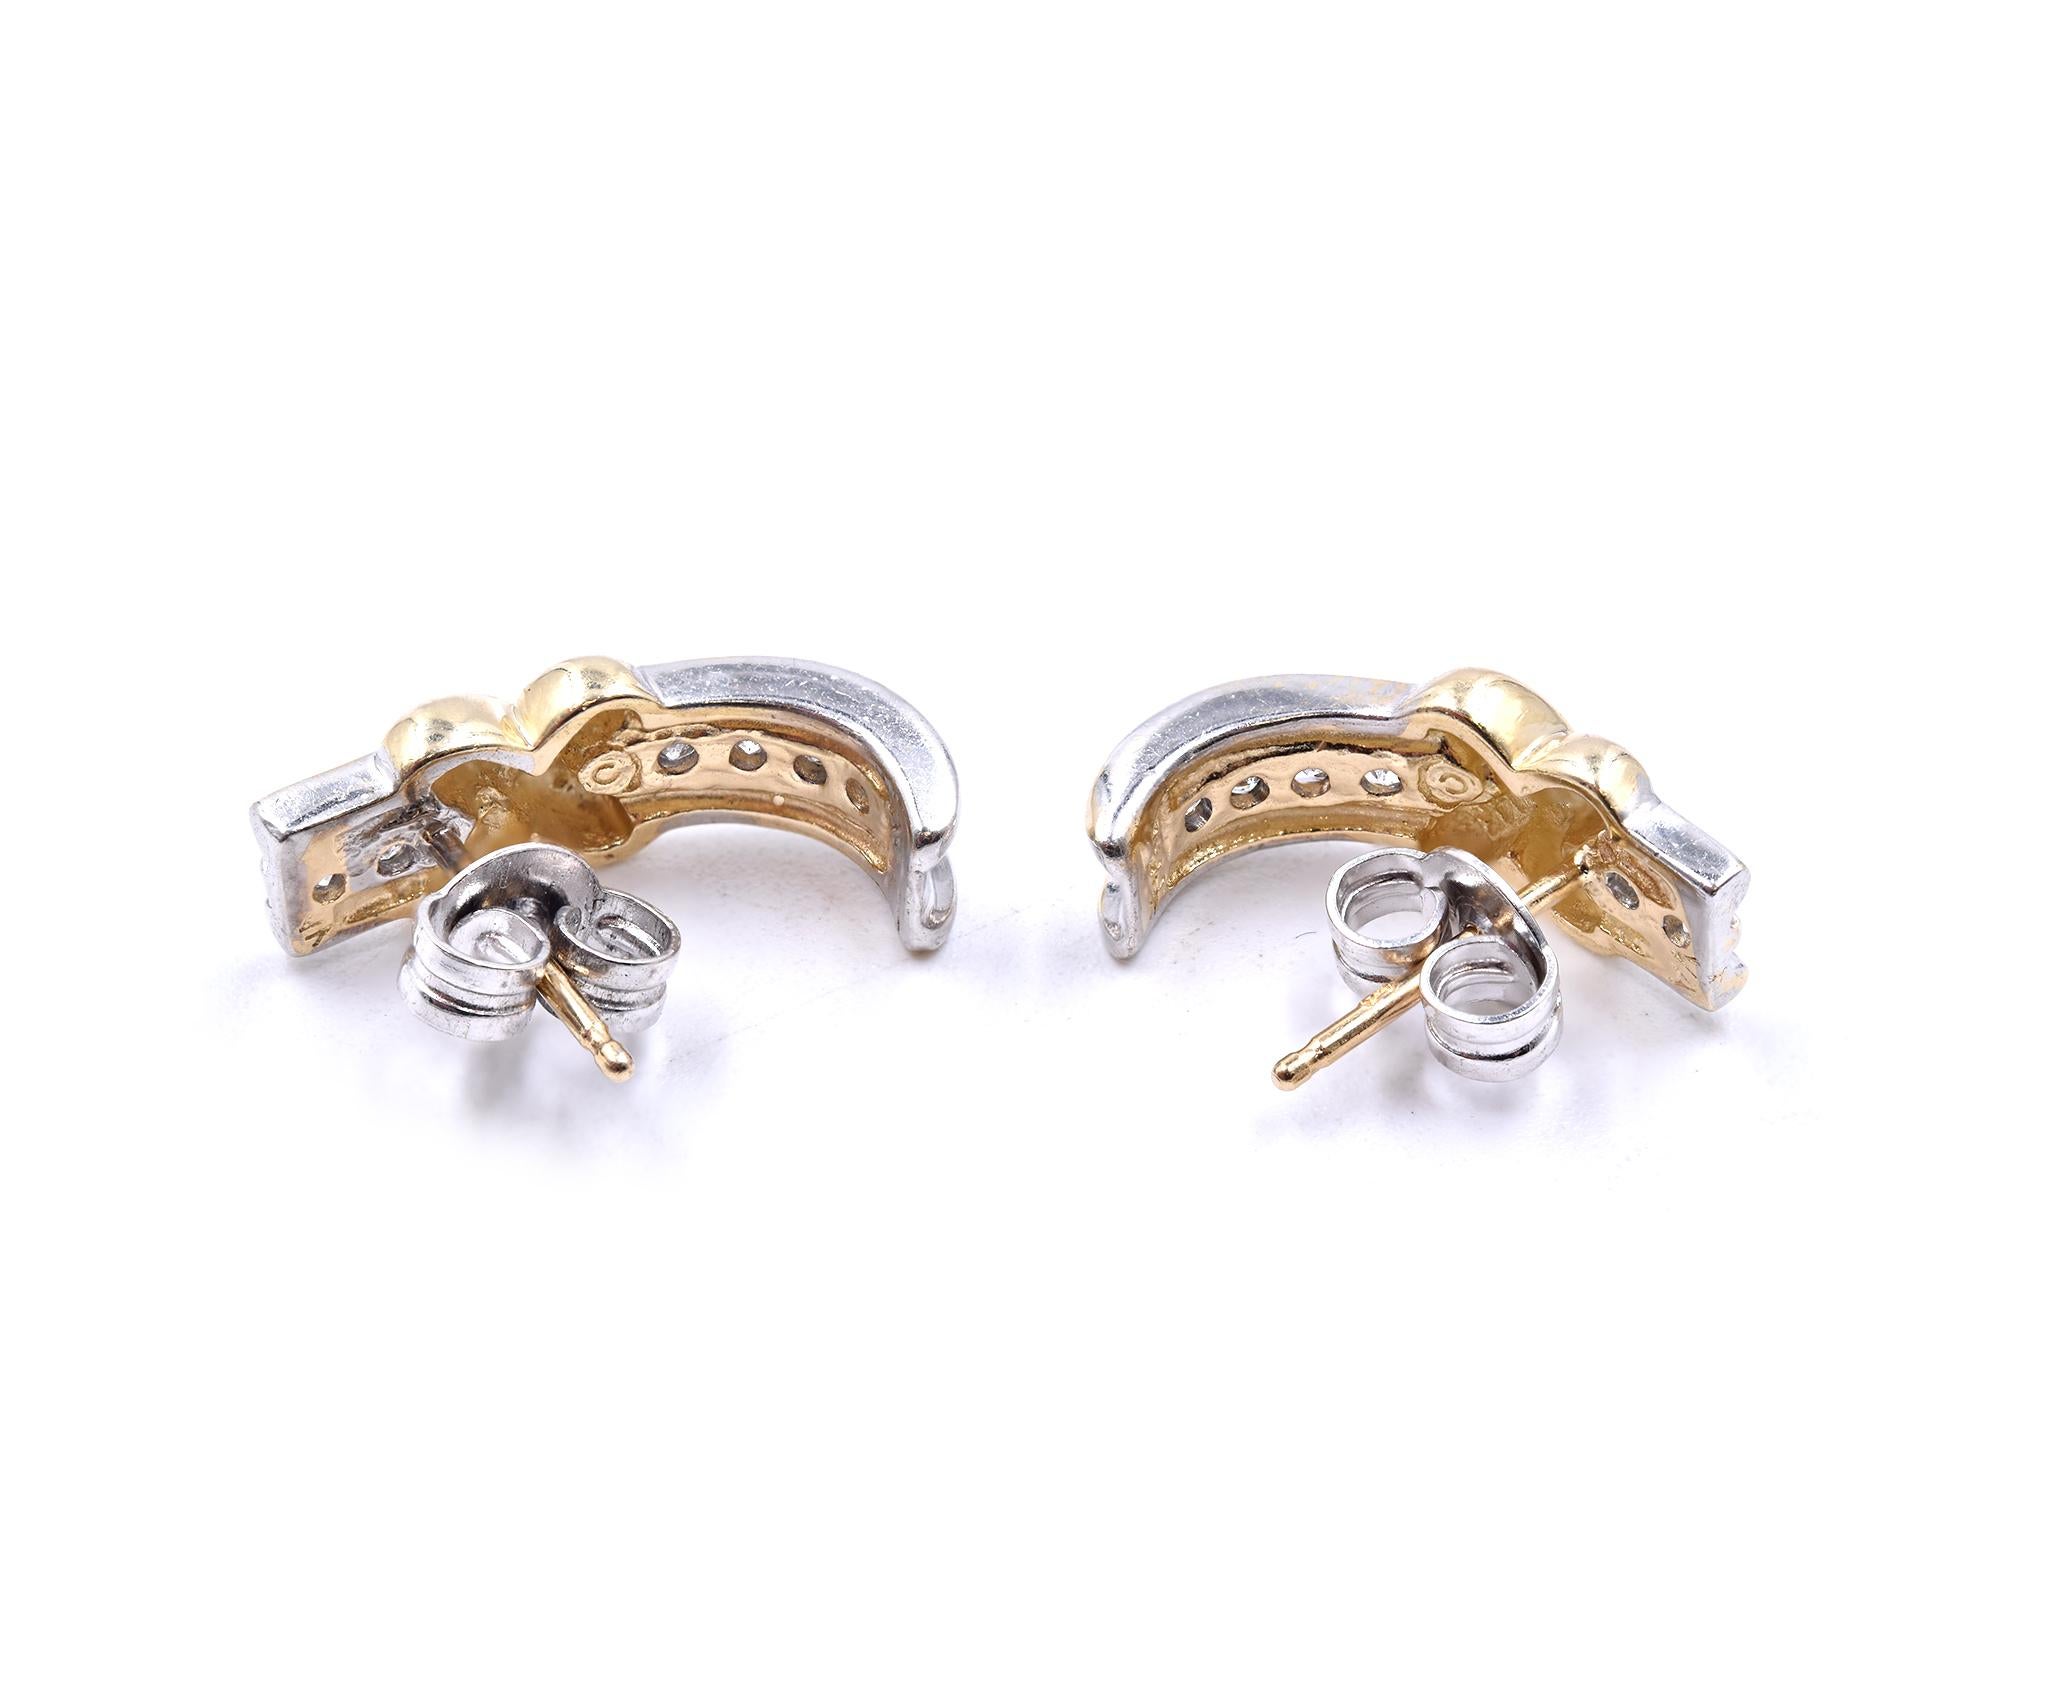 Material: 14K yellow and white gold 
Diamonds: 12 round cut = .12cttw
Color: H
Clarity: SI2
Dimensions: earrings measure 16.5 X 6mm
Weight: 3.32 grams